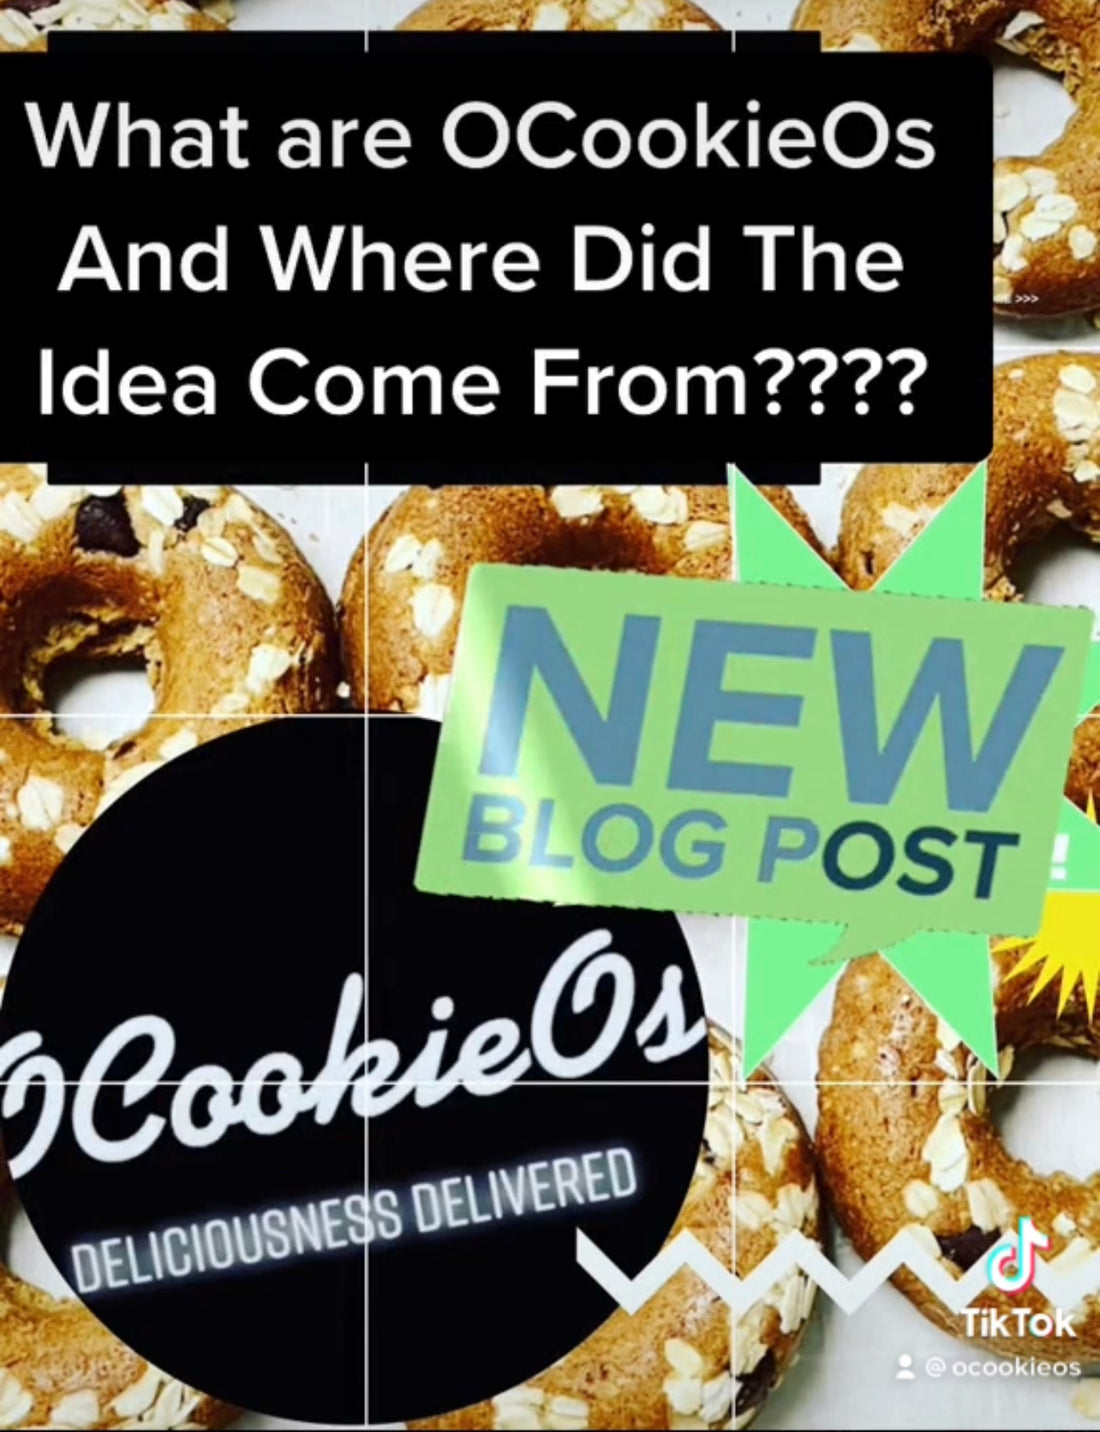 What are OCookieOs and Where Did The Idea Come From??